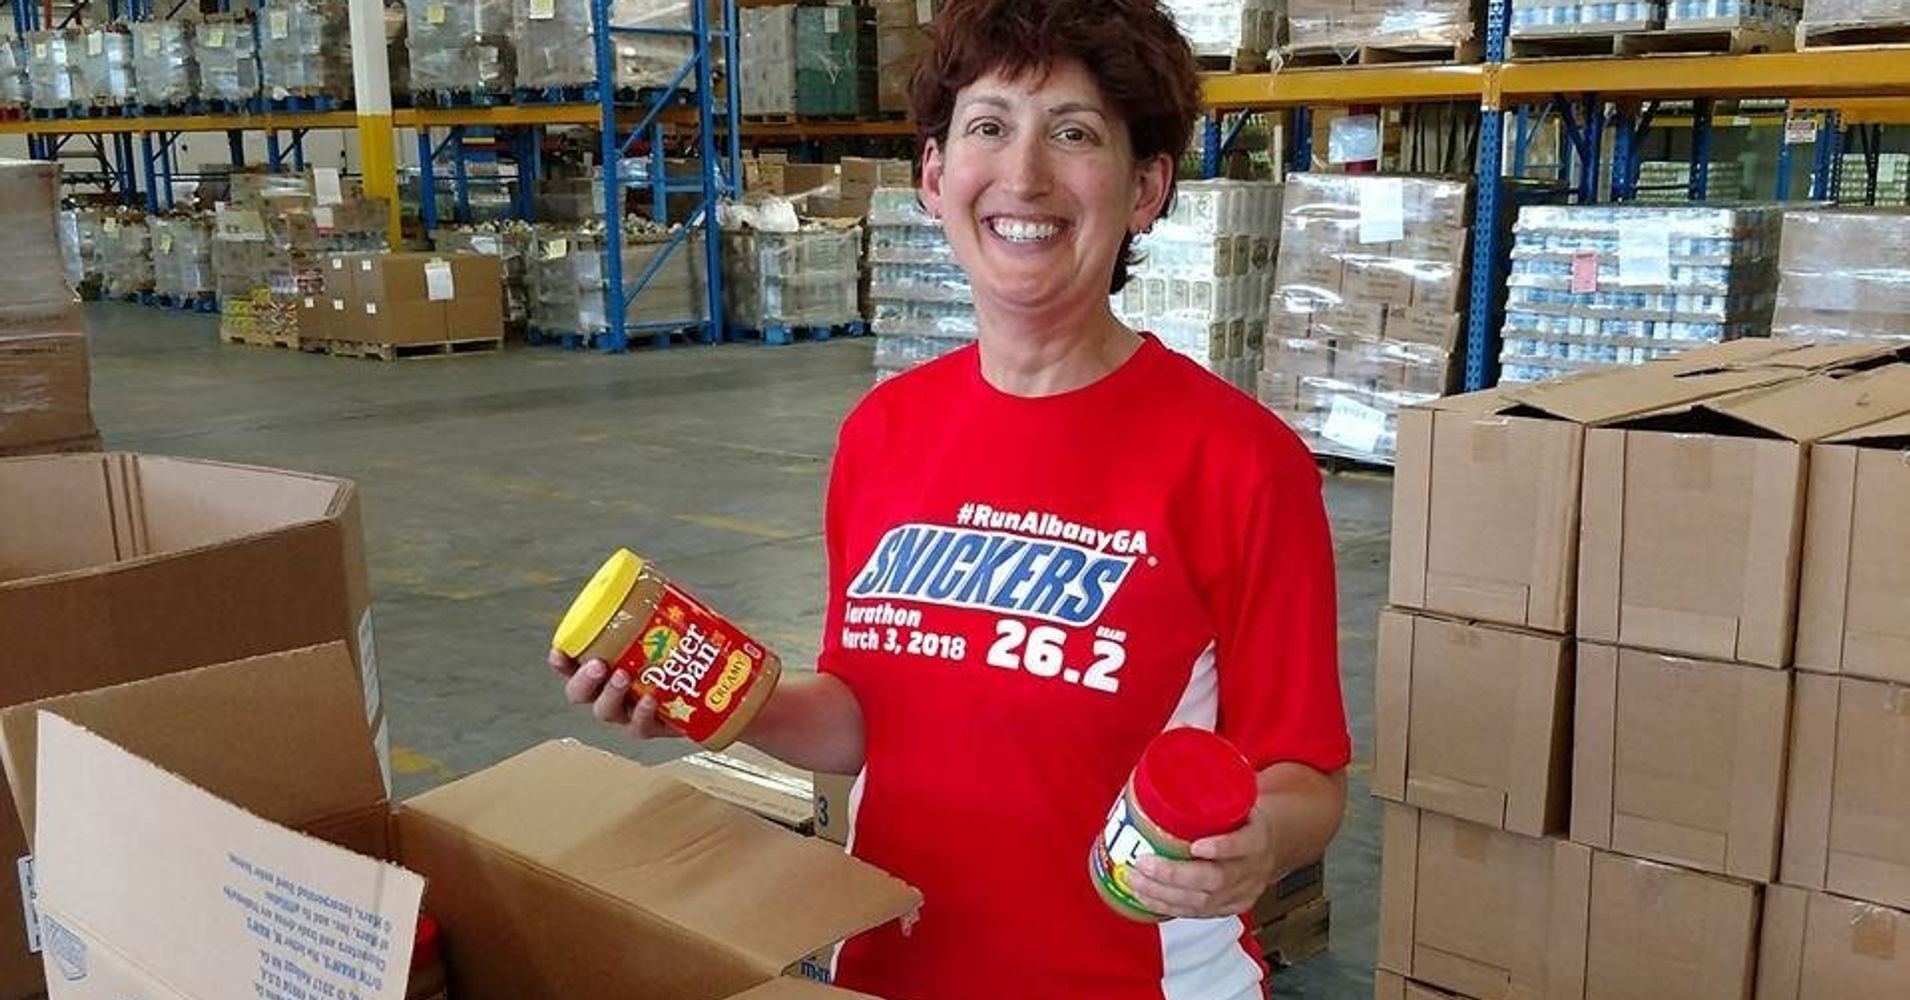 I Volunteered At 200 Food Banks Across The U.S. Here’s What I Learned About Hunger In America.